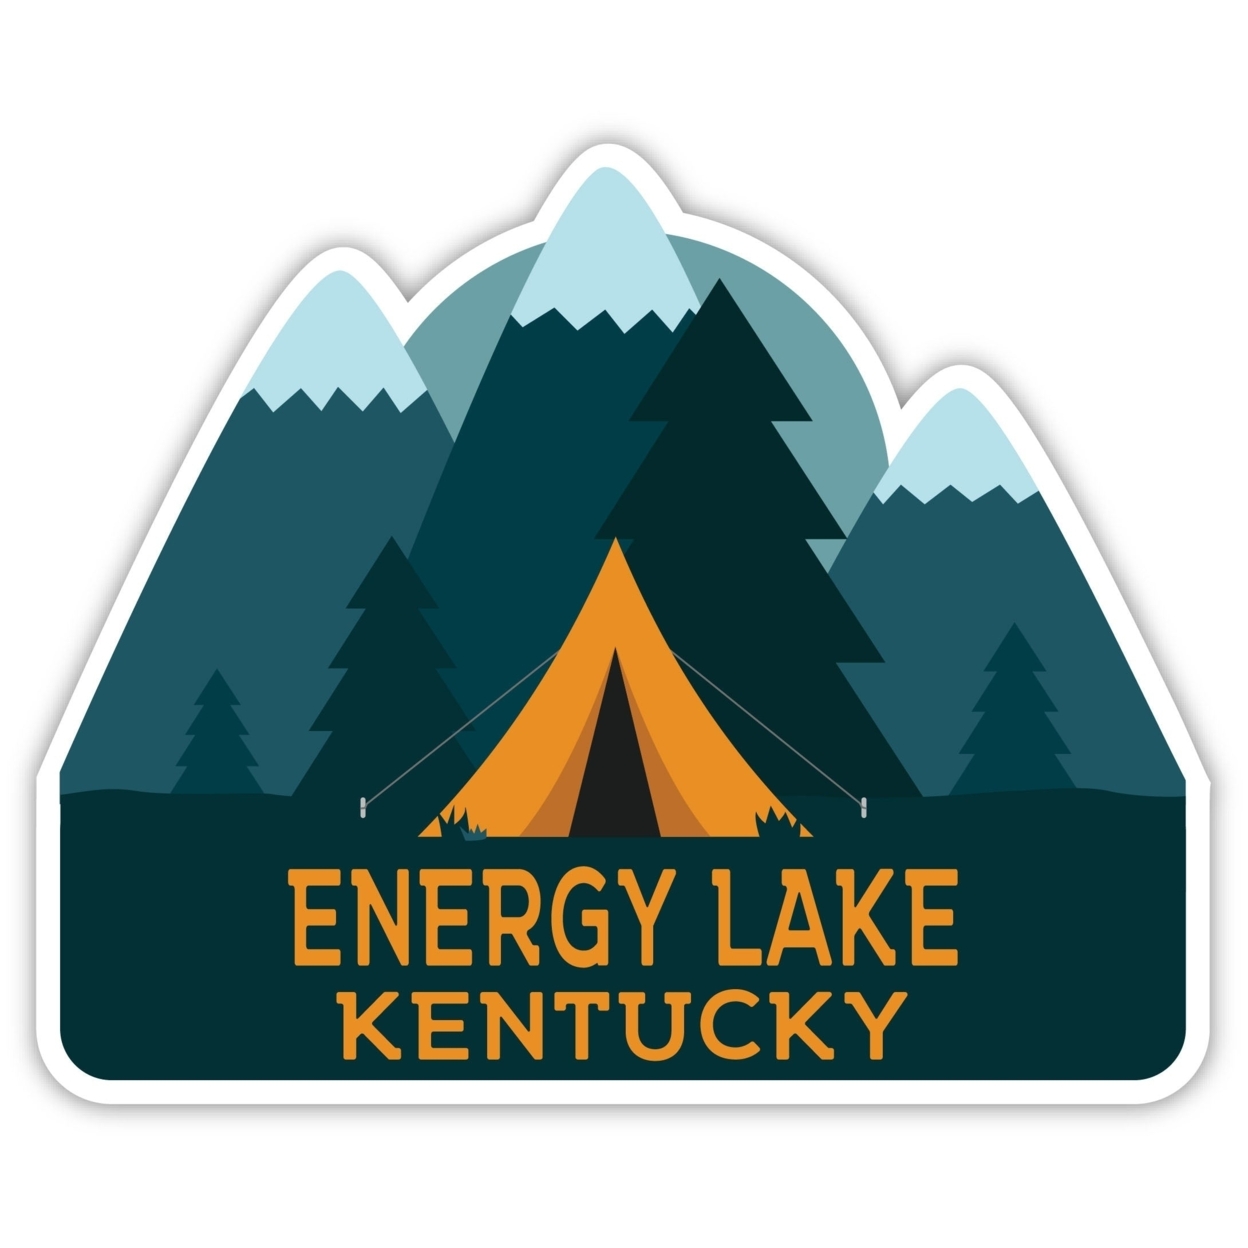 Energy Lake Kentucky Souvenir Decorative Stickers (Choose Theme And Size) - 4-Pack, 2-Inch, Tent